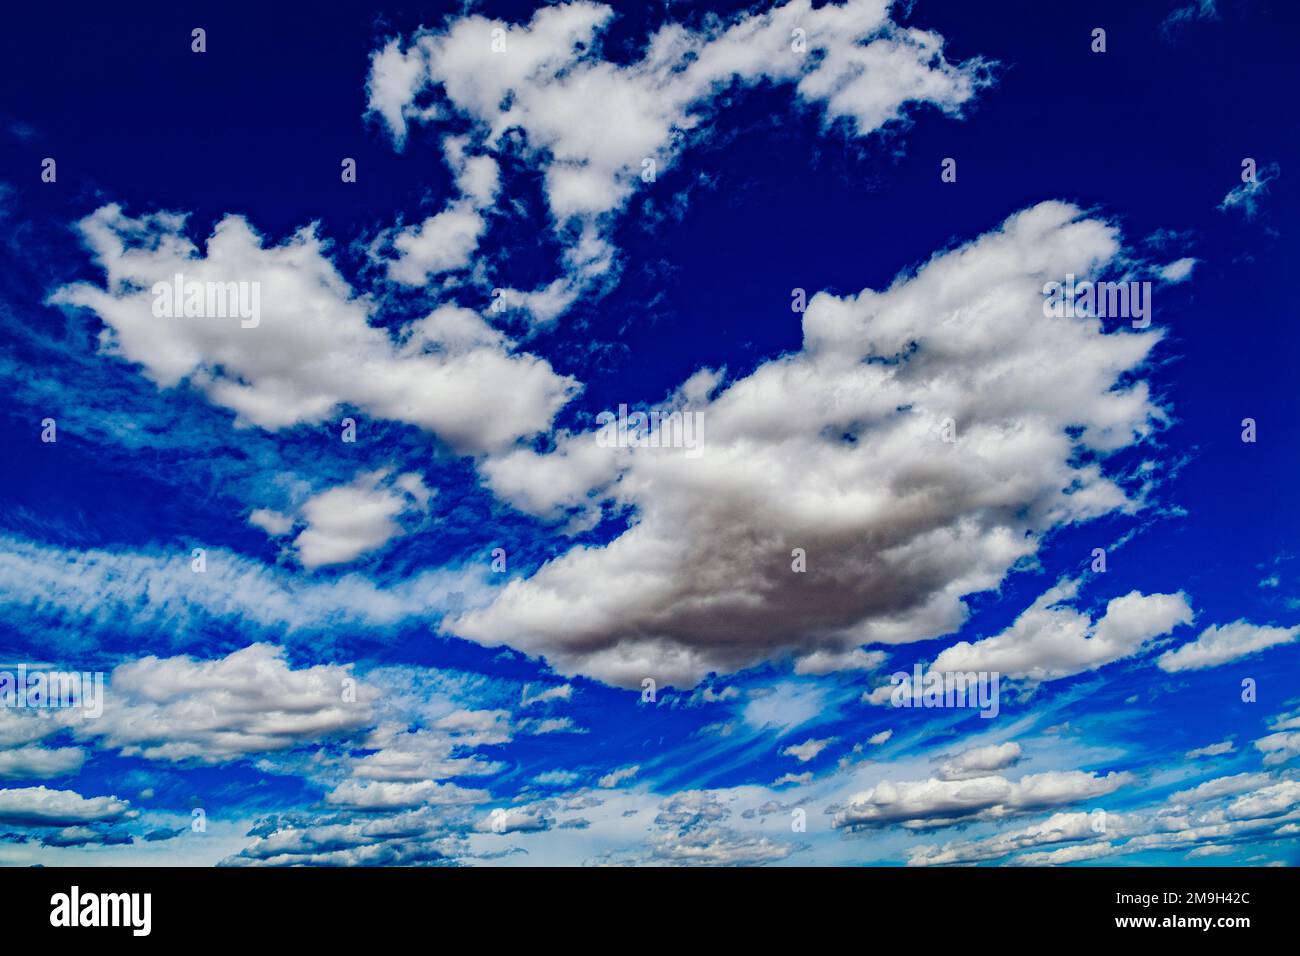 Fluffy clouds in sky Banque D'Images